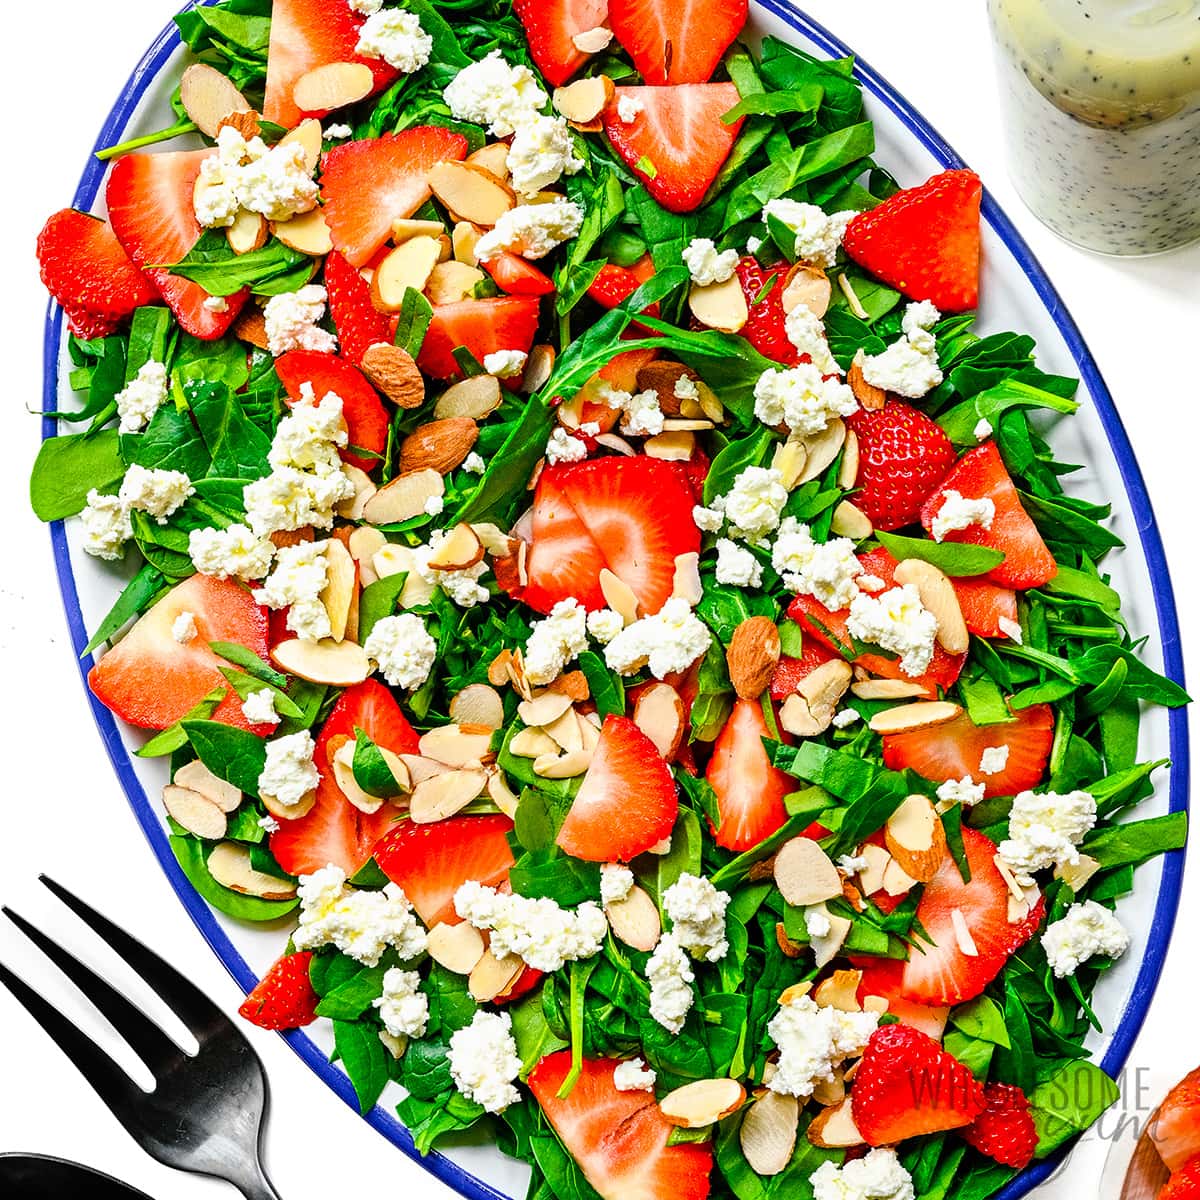 Spinach, strawberries, goat cheese, and almonds on a platter.